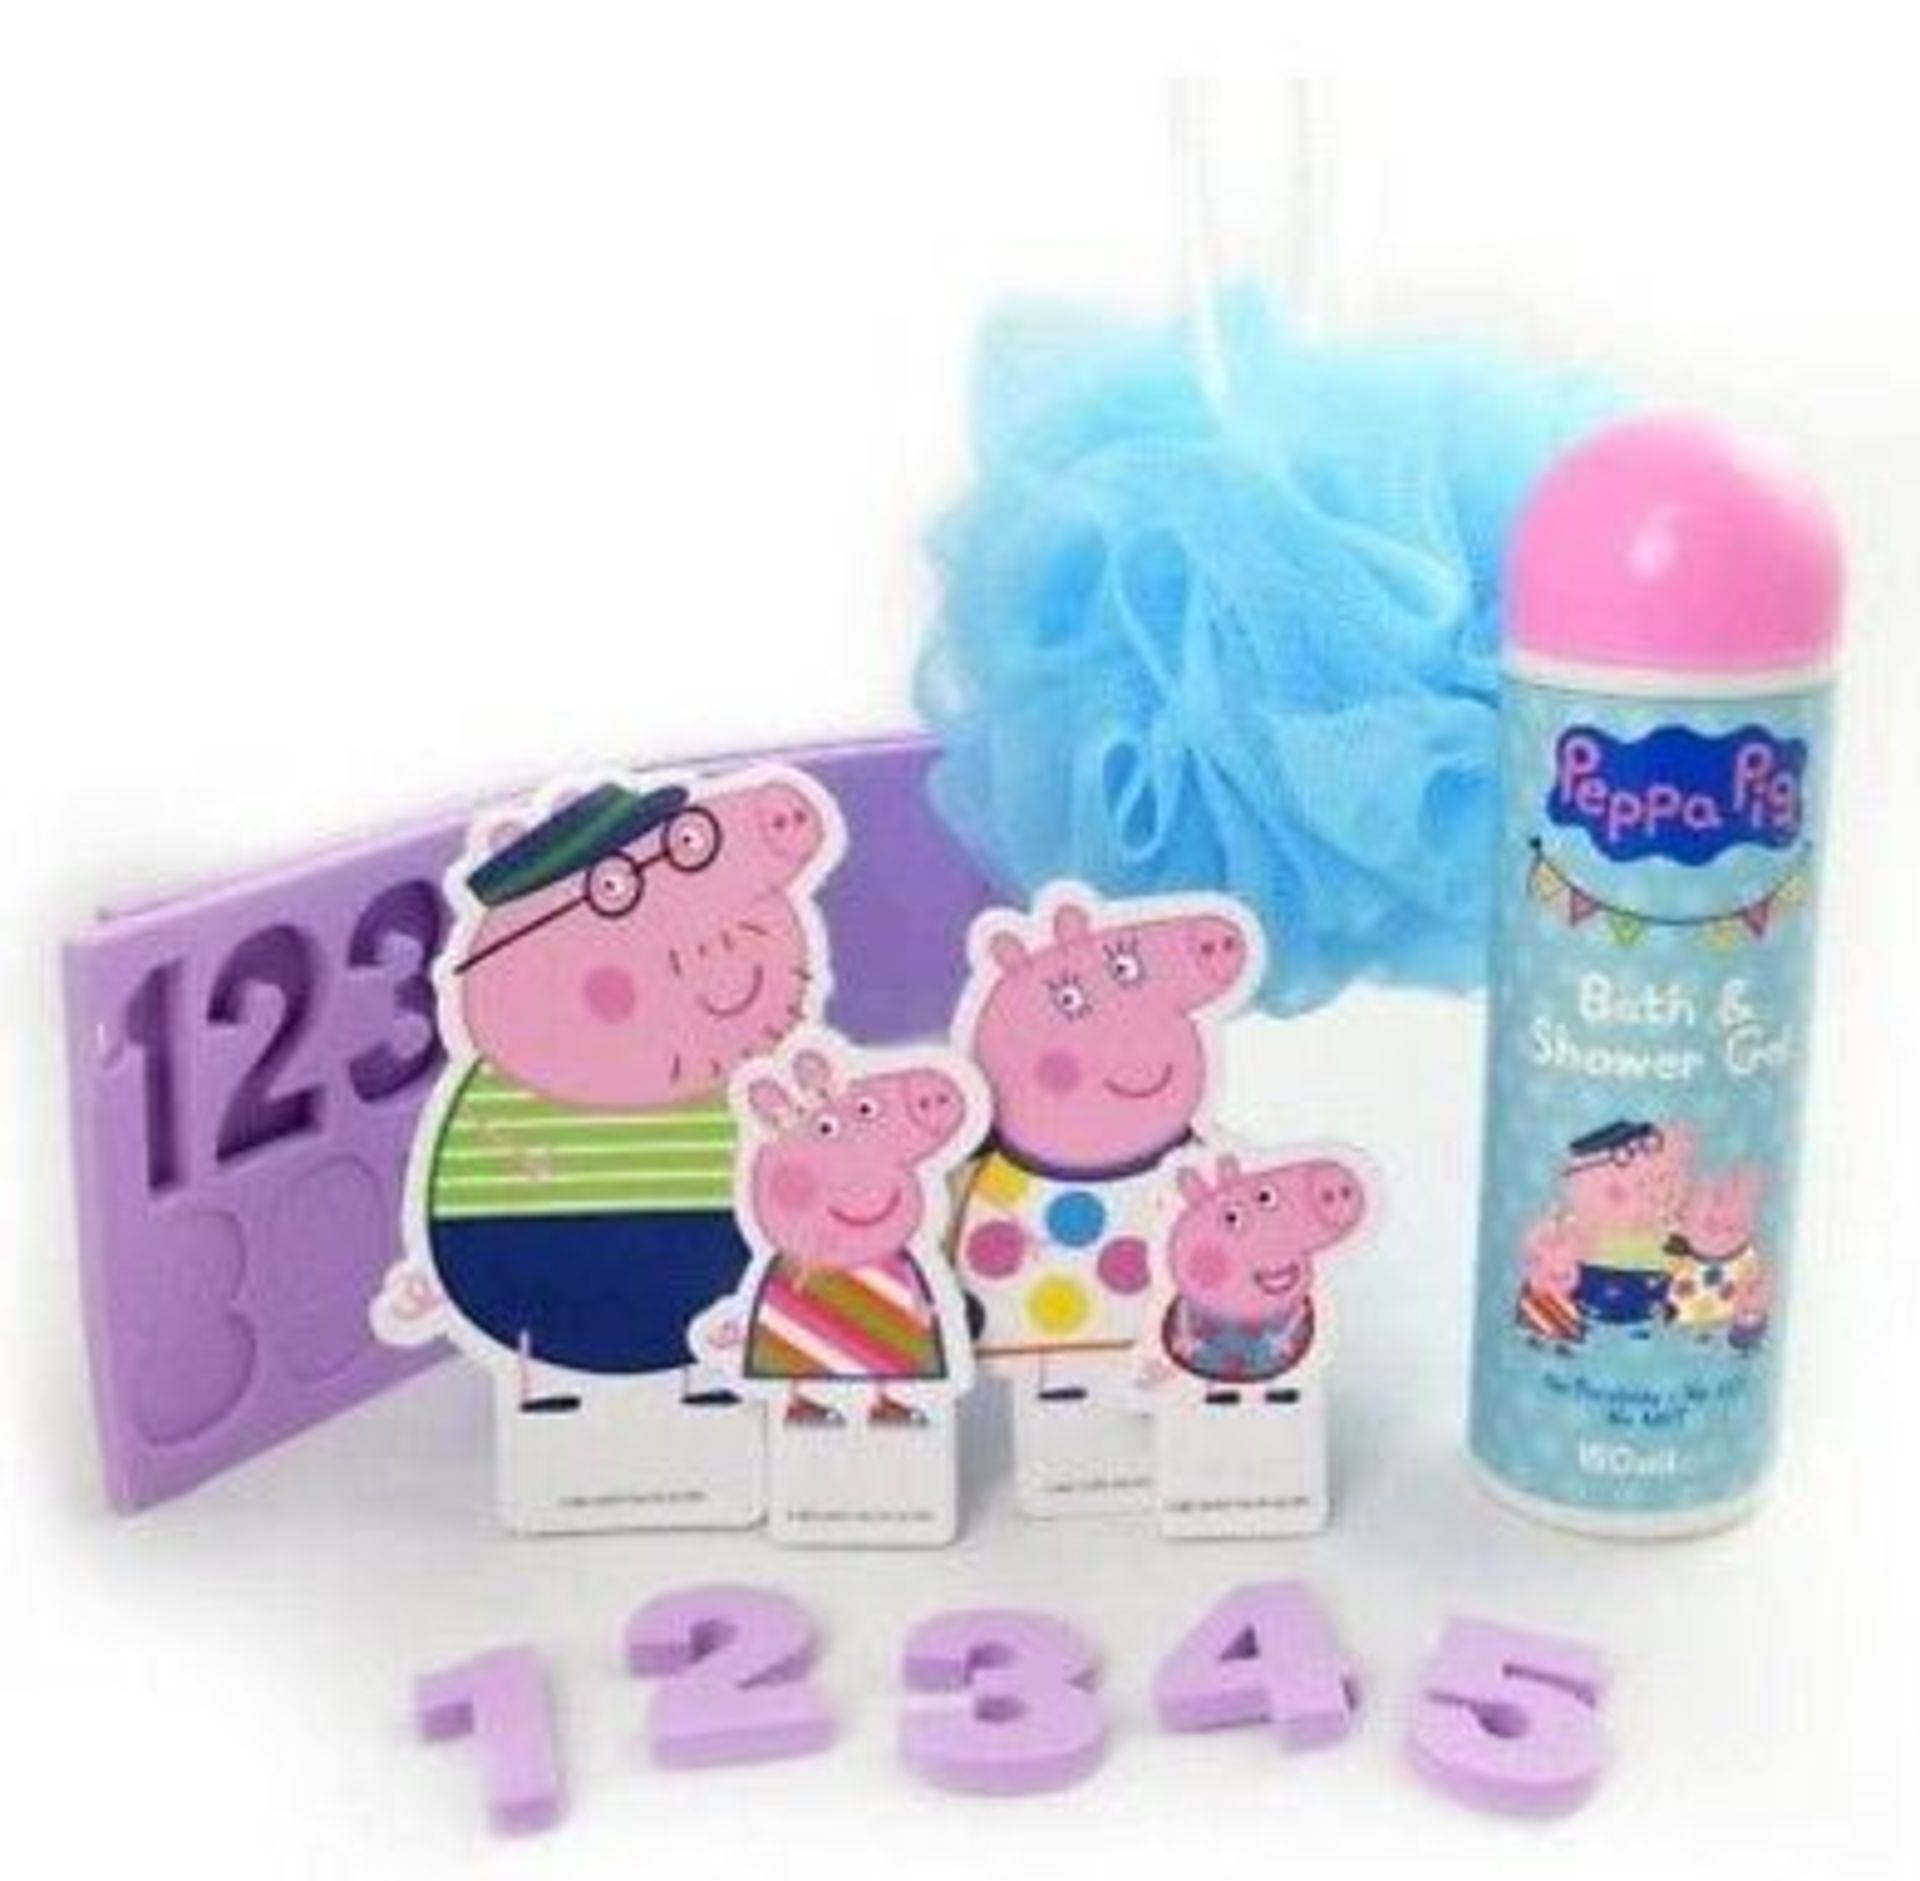 60 x Peppa Pig Campervan Bath Sets (with cut-out Peppa Pig characters, bath numbers, - Image 3 of 3